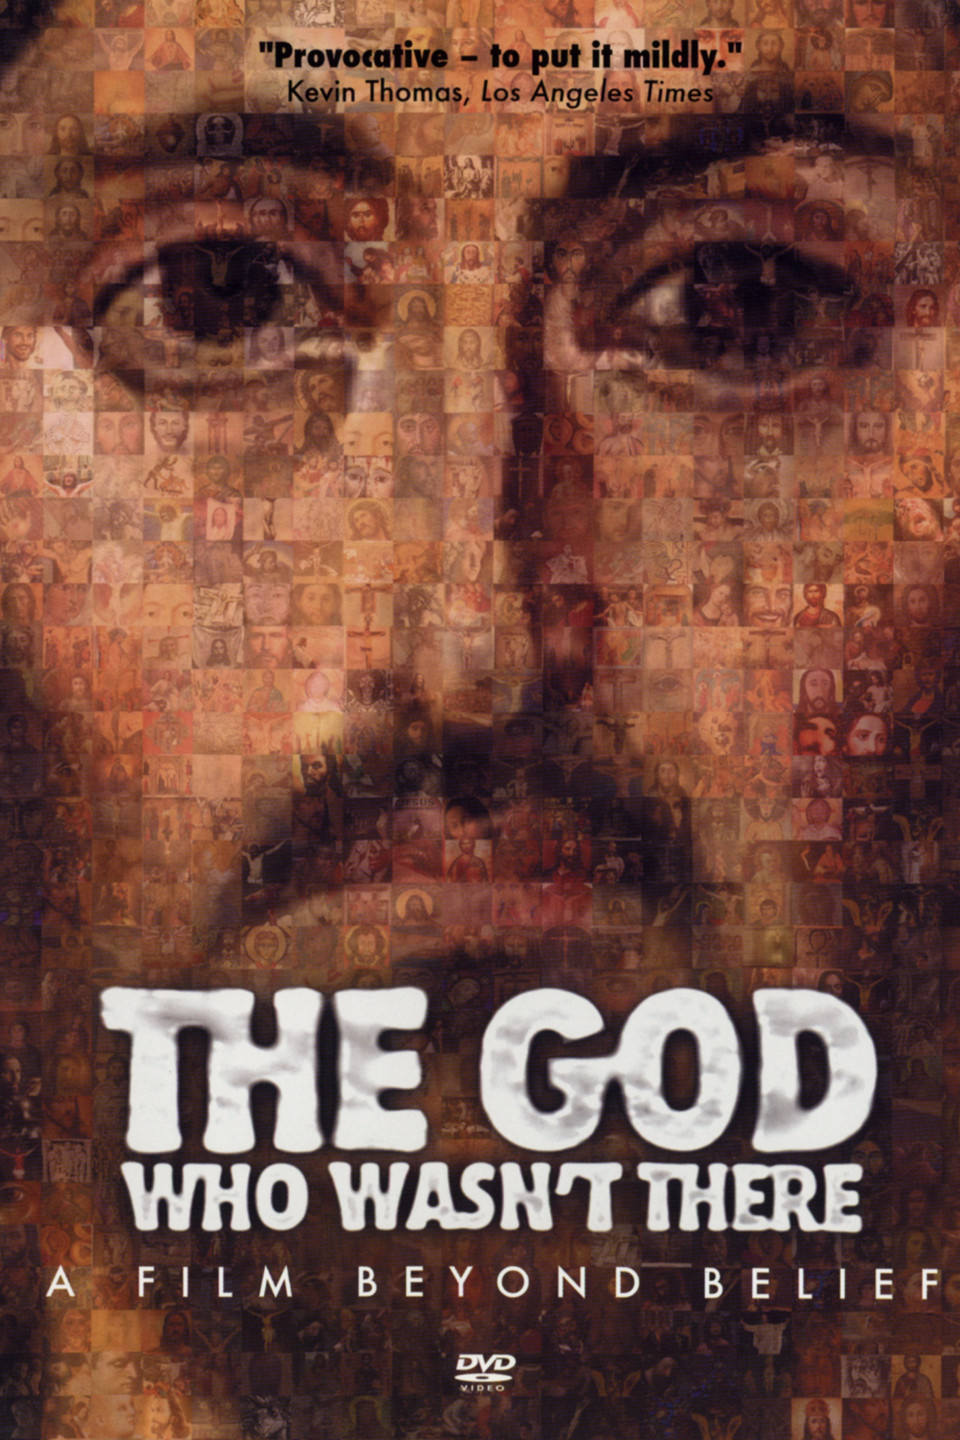 The God Who Wasnt There (DVD, 2005)- SOLD